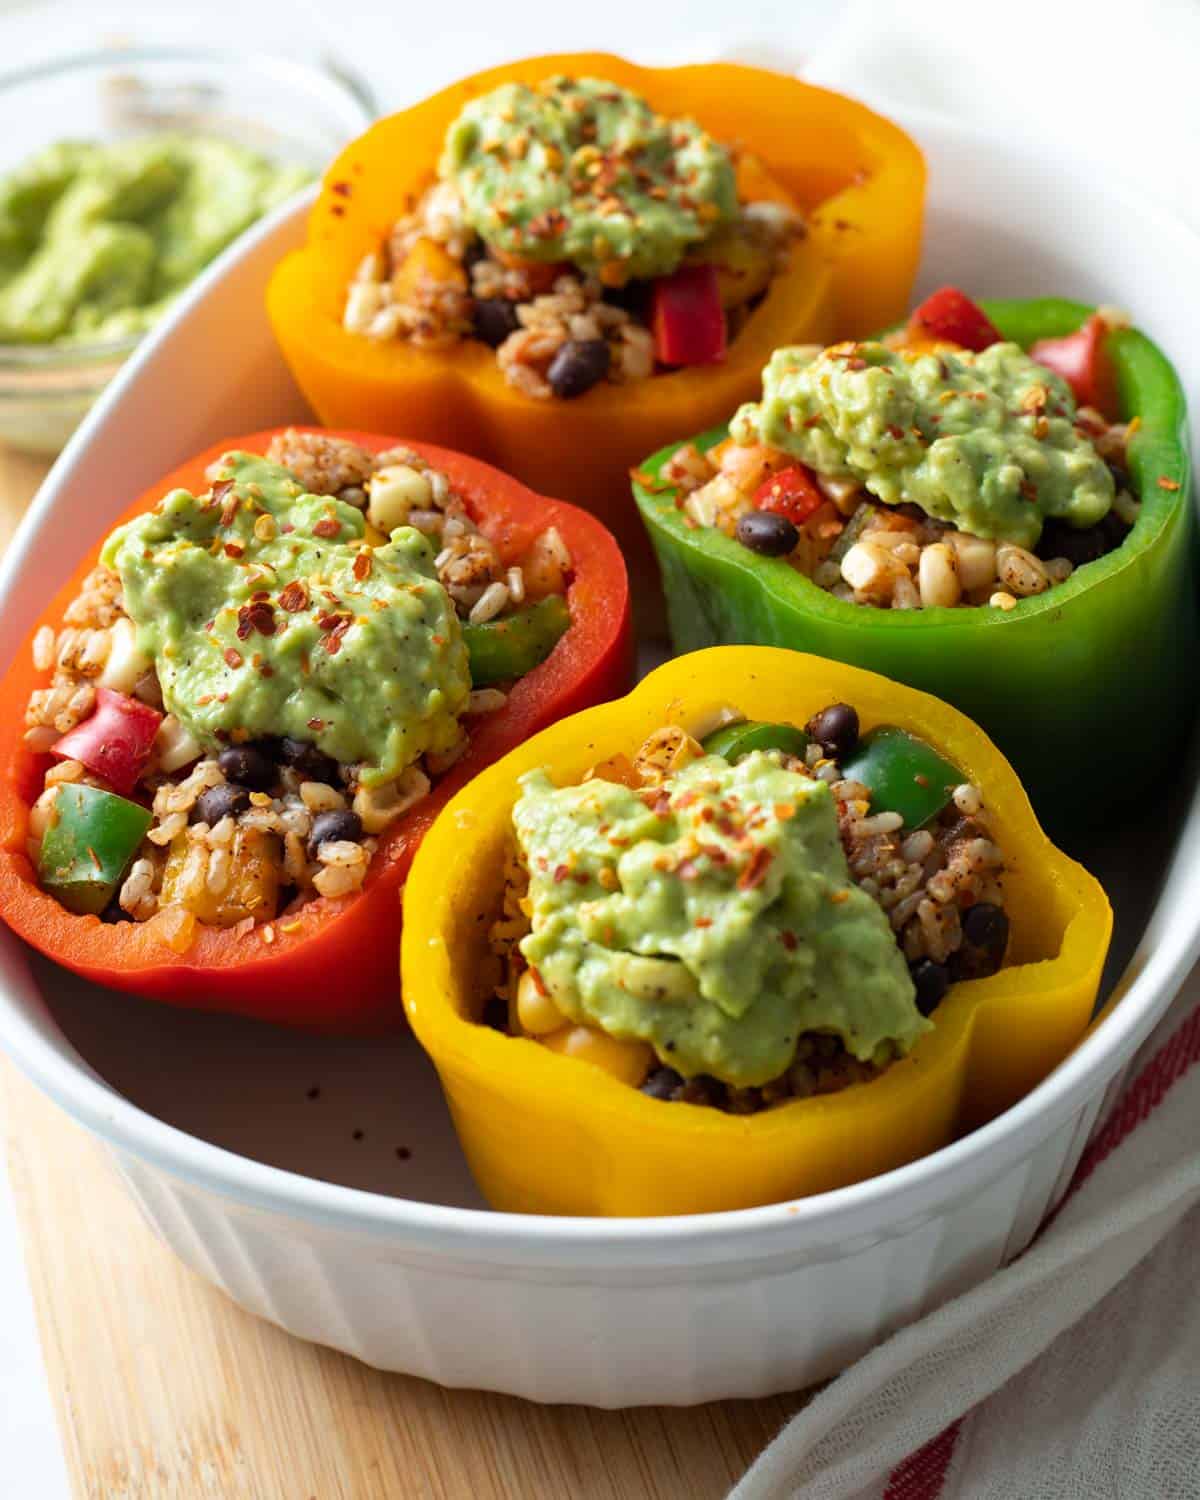 Vegan stuffed peppers topped with avocado cream in baking dish.
